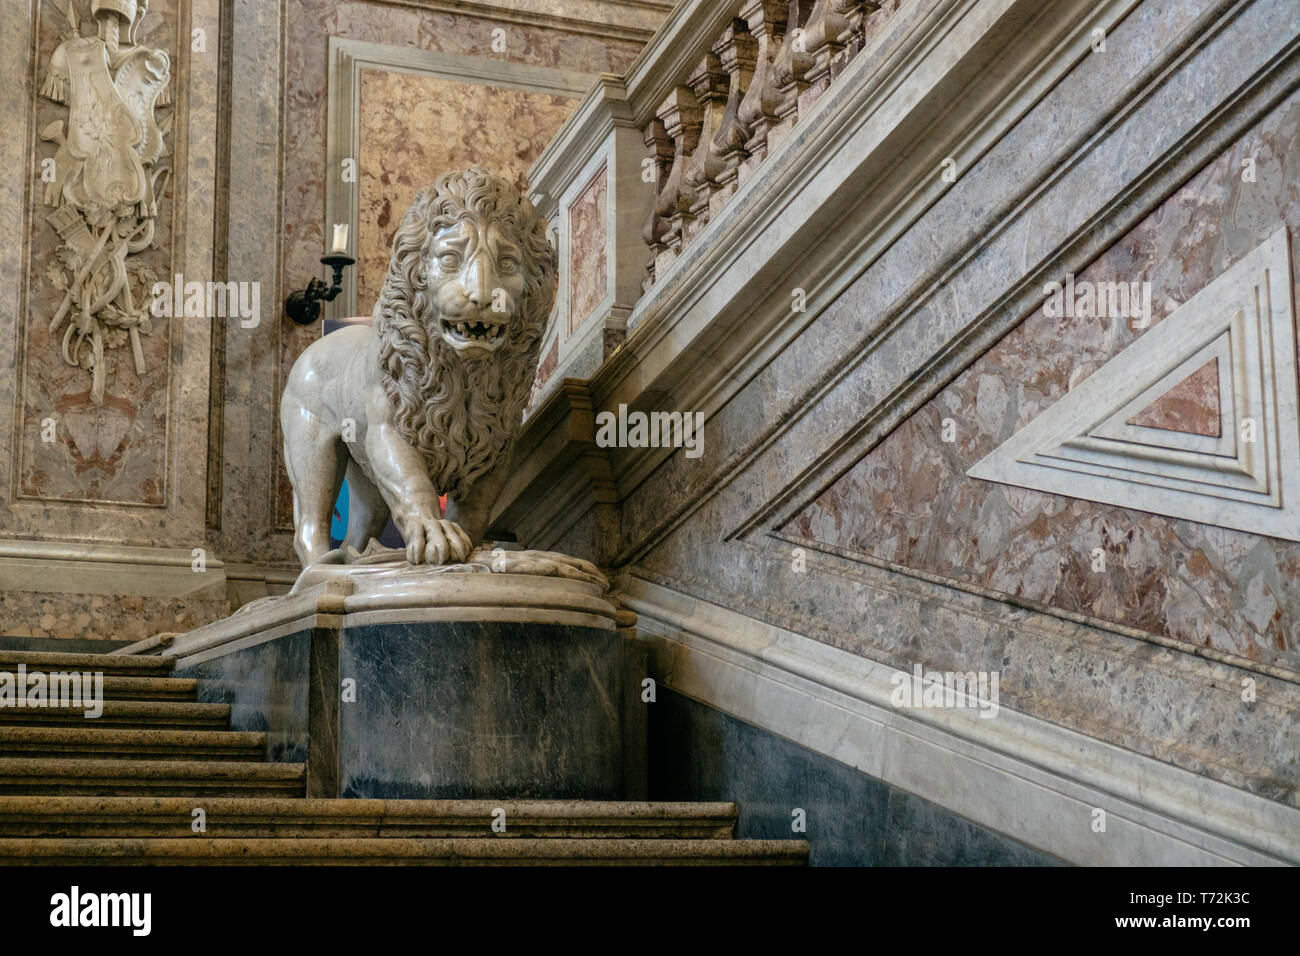 A majestic marble lion stands at the grand staircase of the 'Reggia di Caserta'. The staircase was a role model for other royal residences. Stock Photo